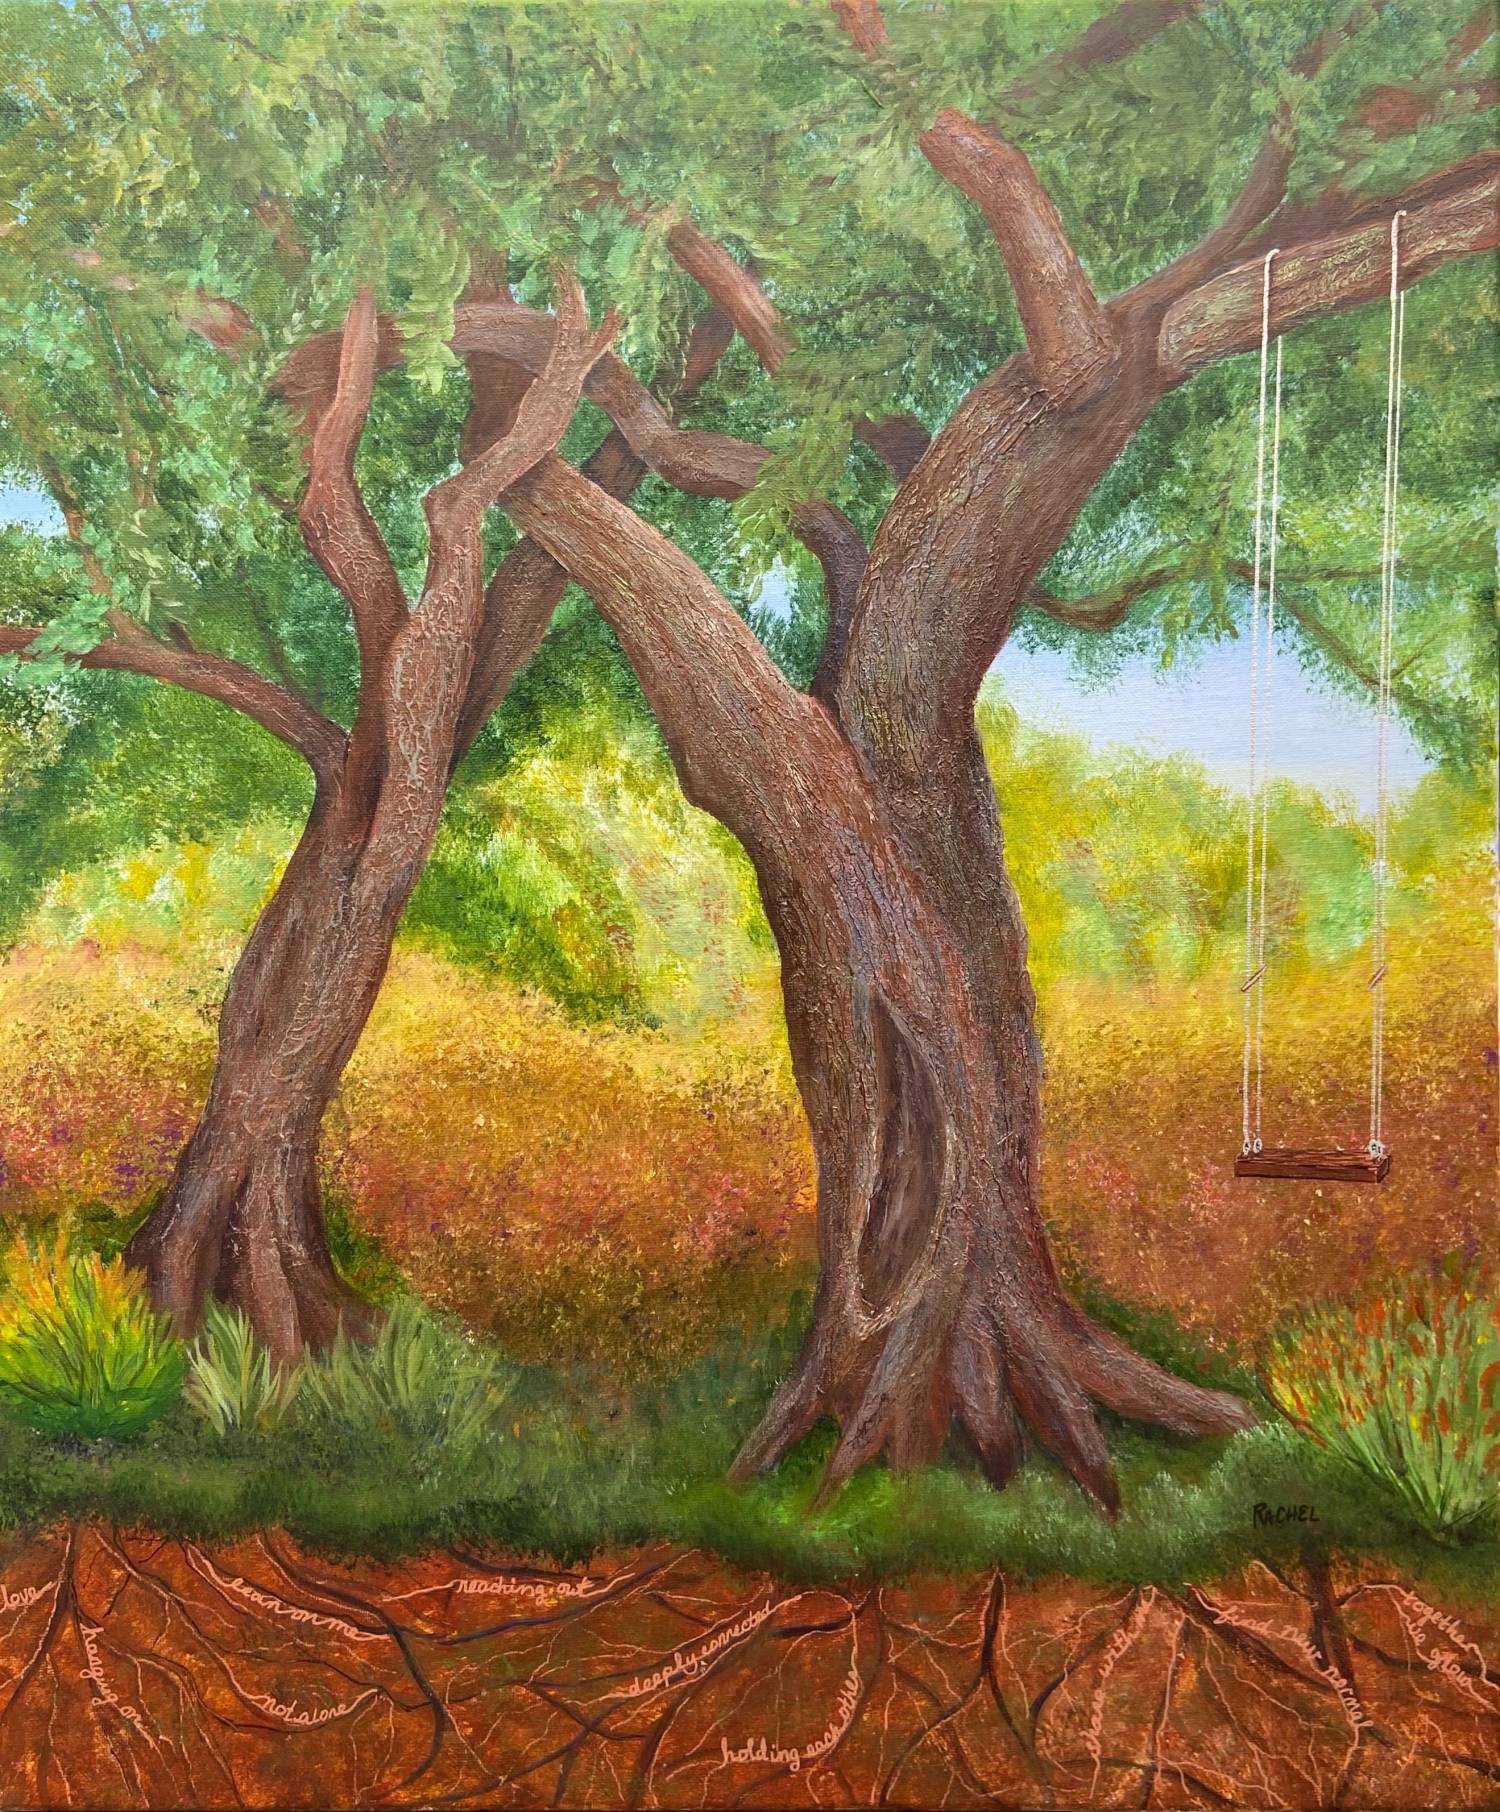 Rachel Gingold's Brushes with Cancer piece, "Strength in Connection," which features two trees leaning into each other with their root systems shown underneath them